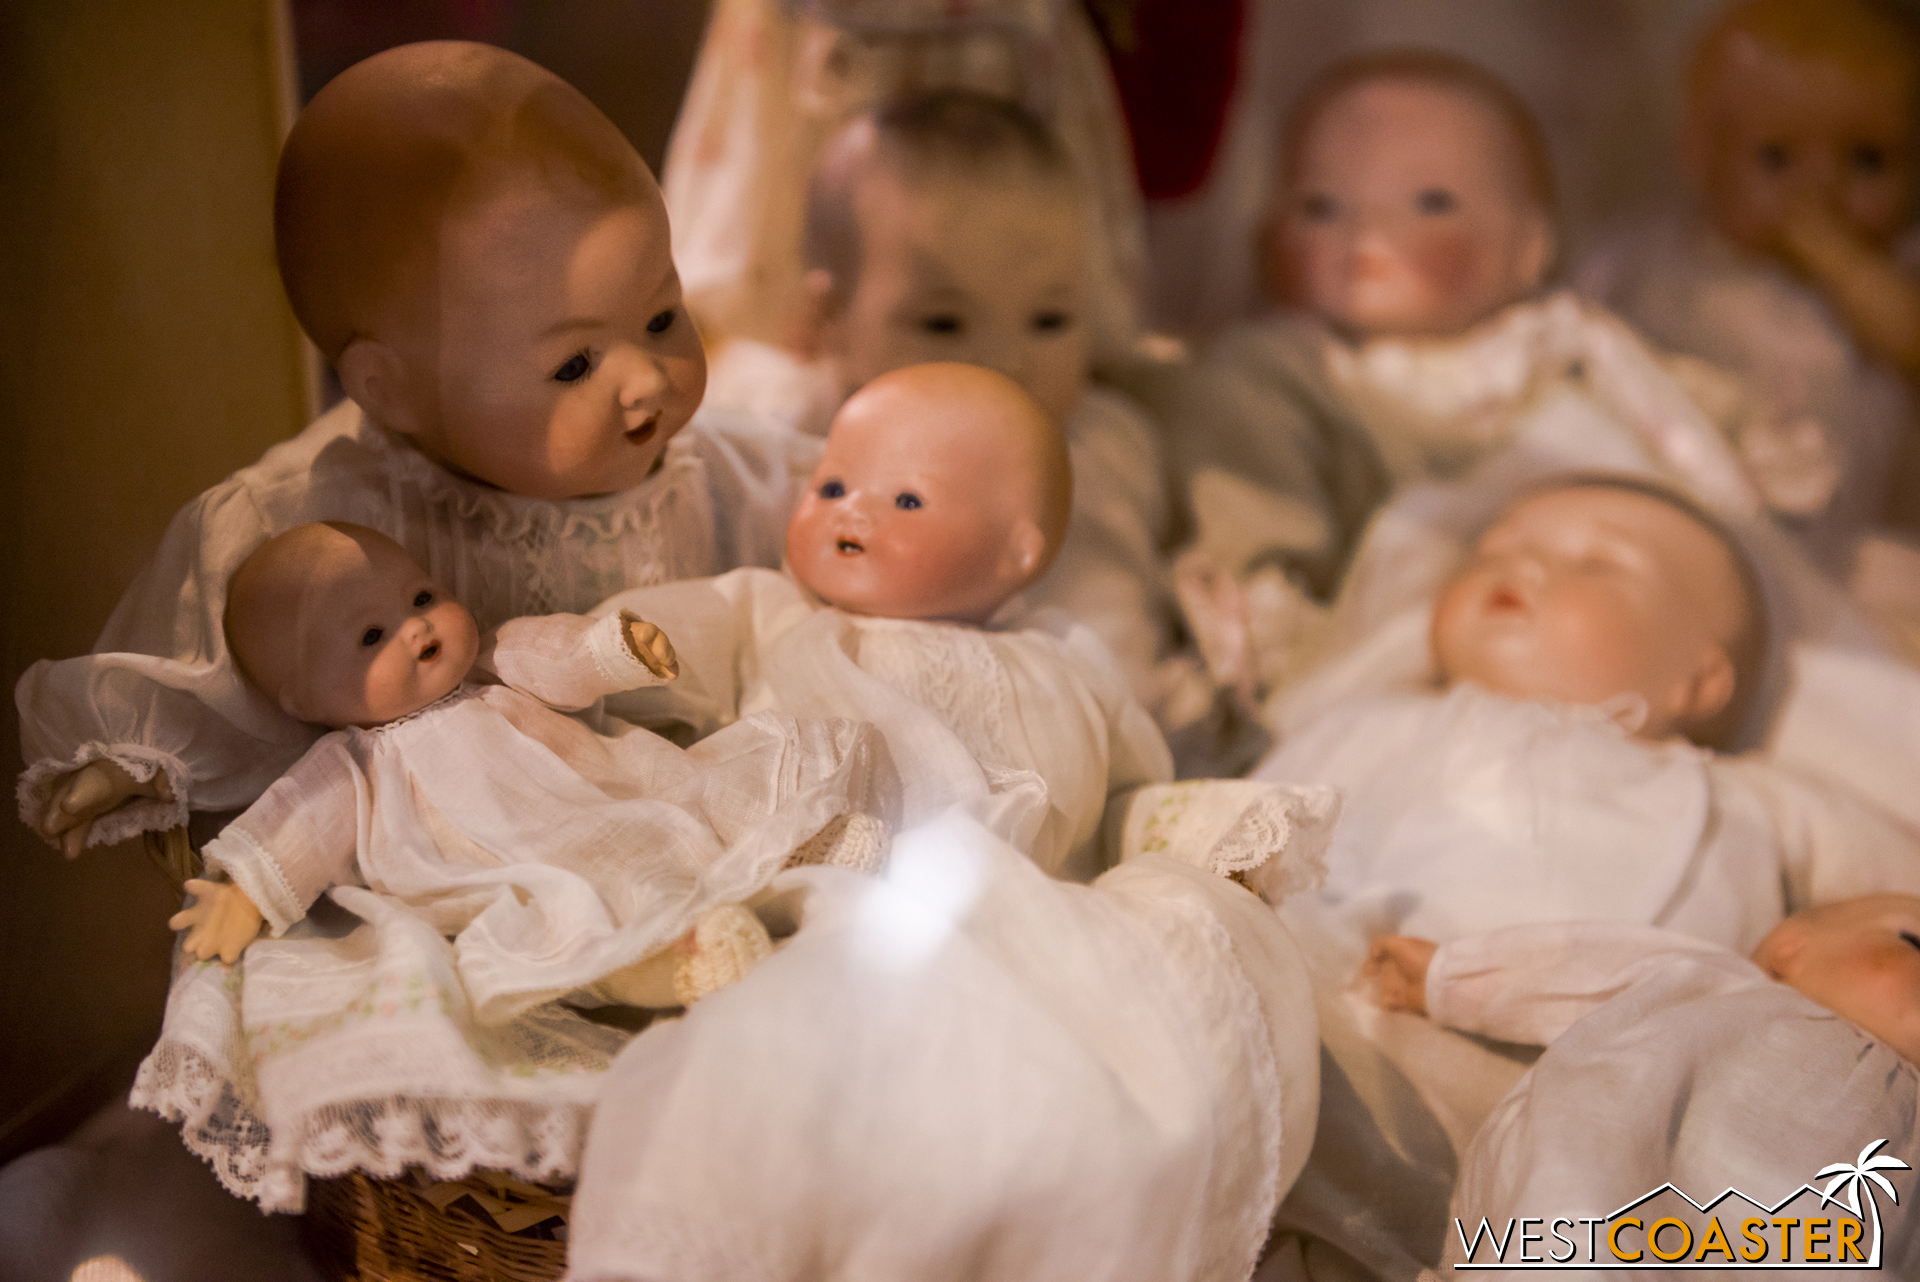  If you're not creeped out enough, here's a baby doll holding a baby doll with another baby doll... 